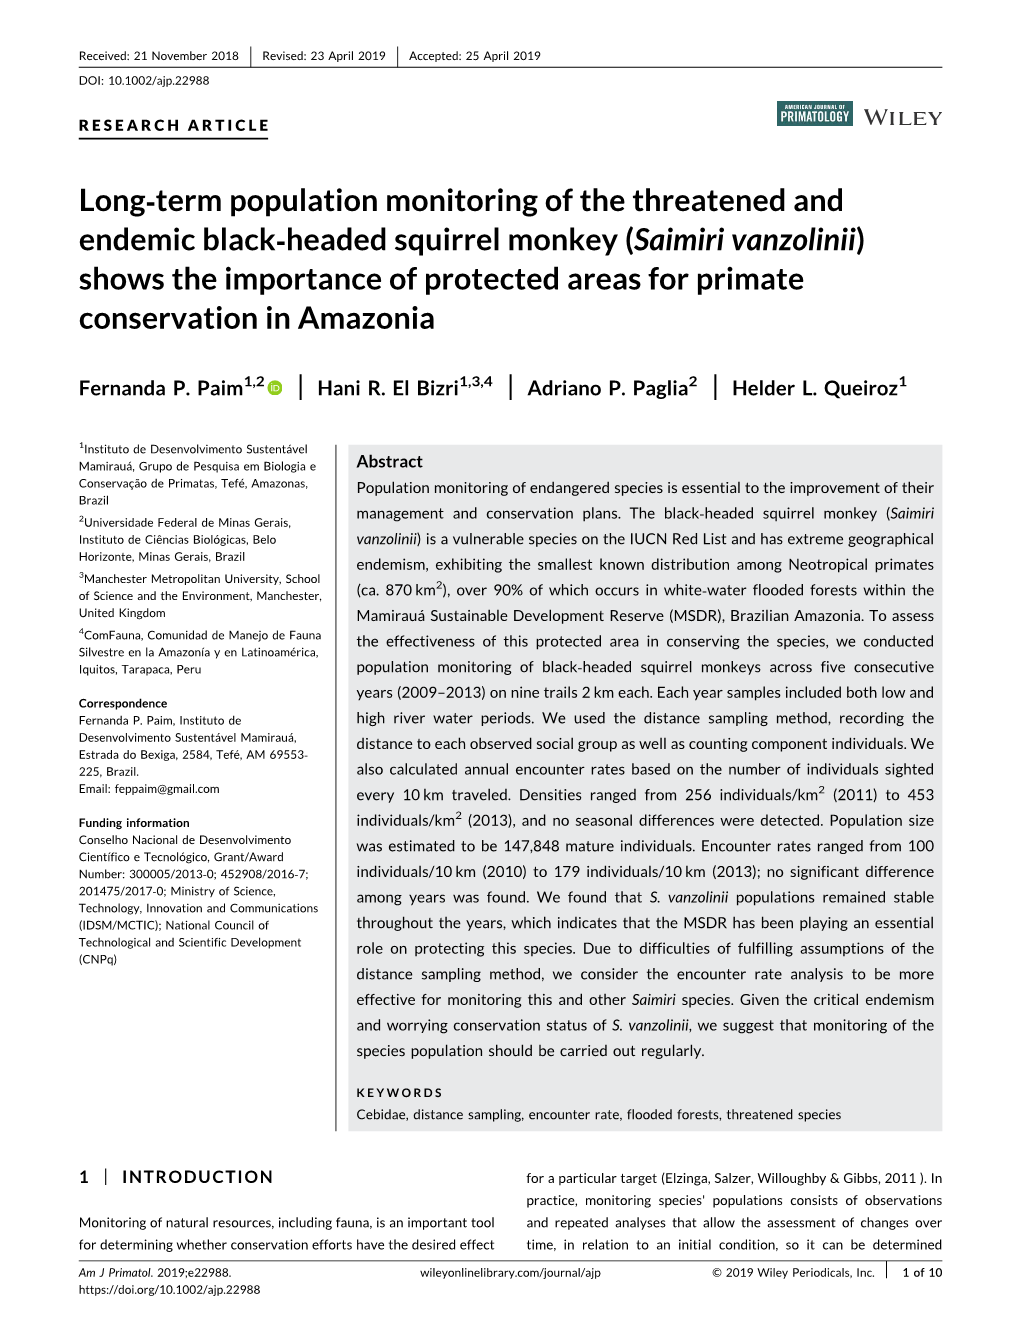 Long-Term Population Monitoring of the Threatened and Endemic Black